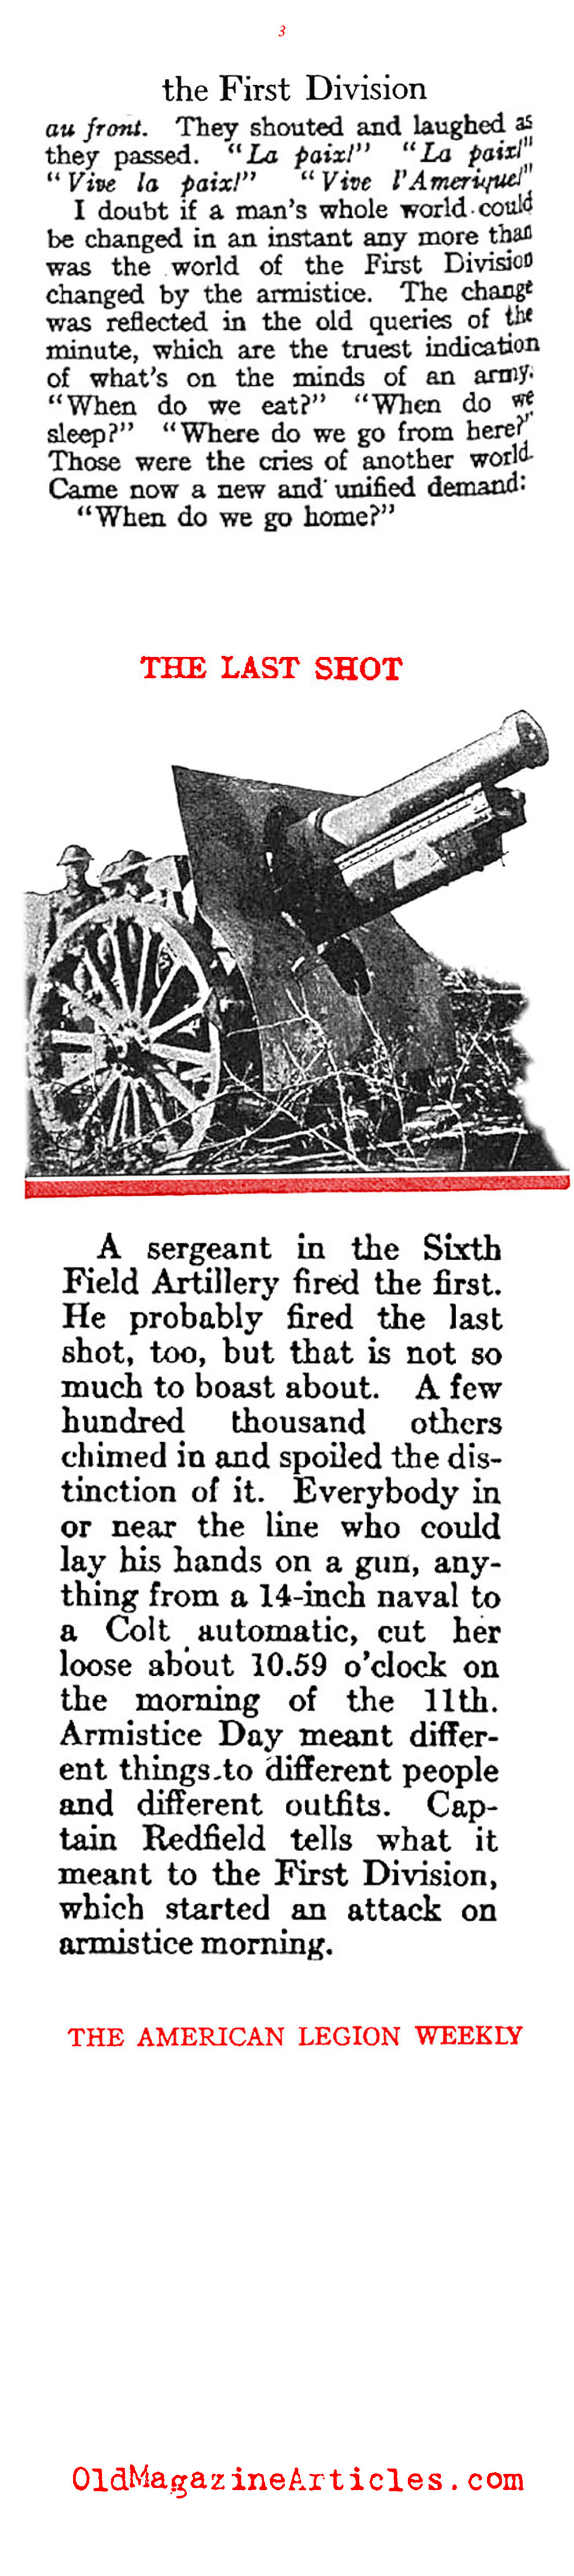 11/11 with the U.S. First Division (American Legion Weekly, 1919)